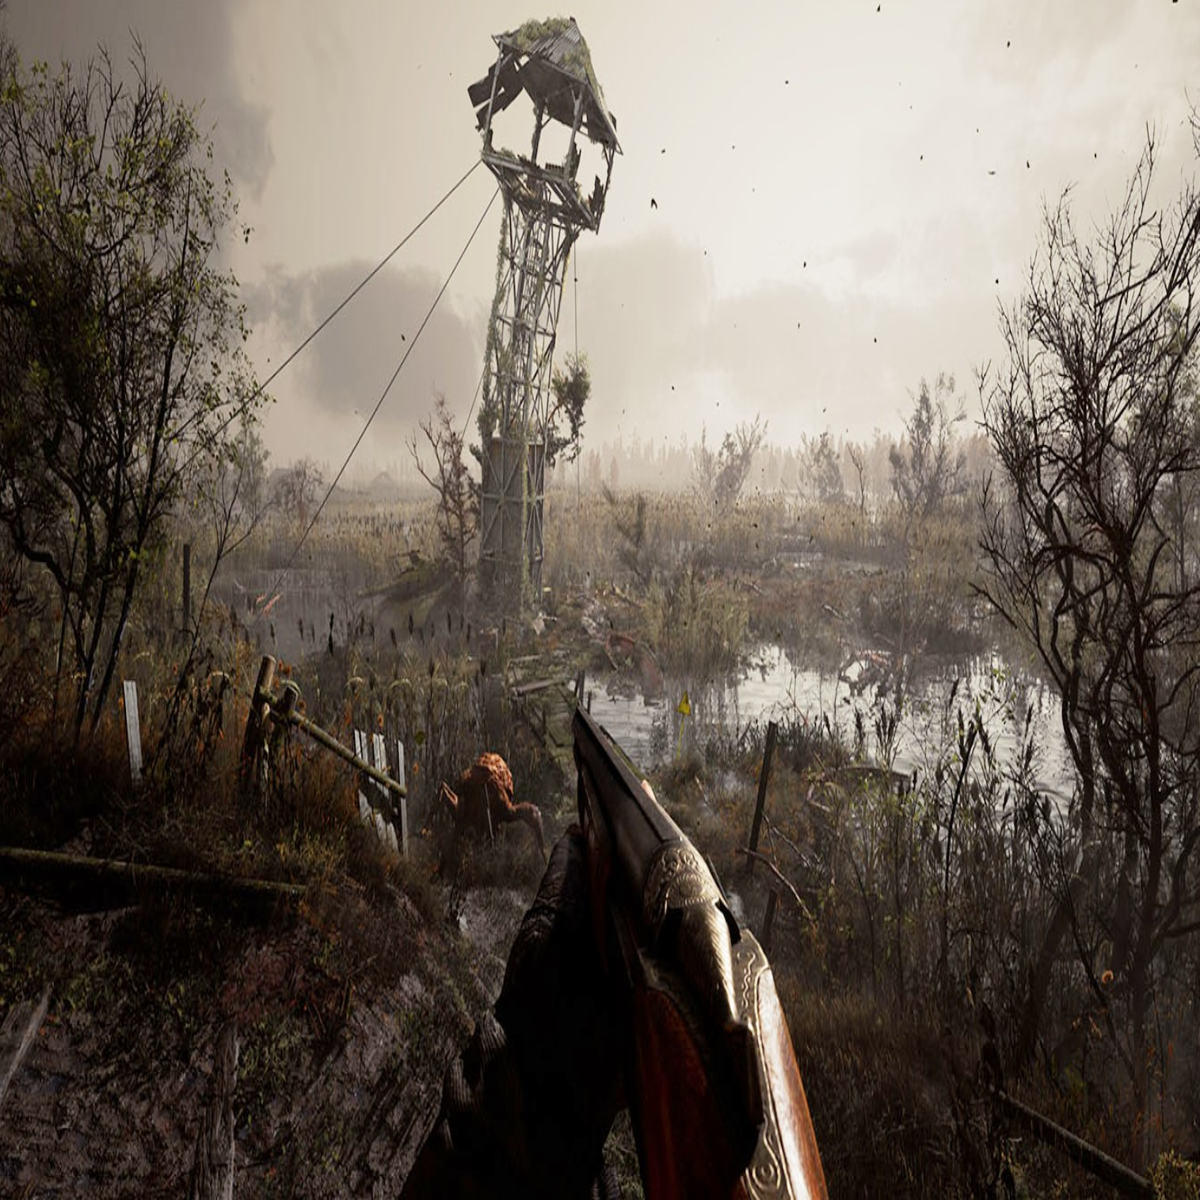 Stalker 2 Delay Likely After Xbox Pre-orders Are Canceled